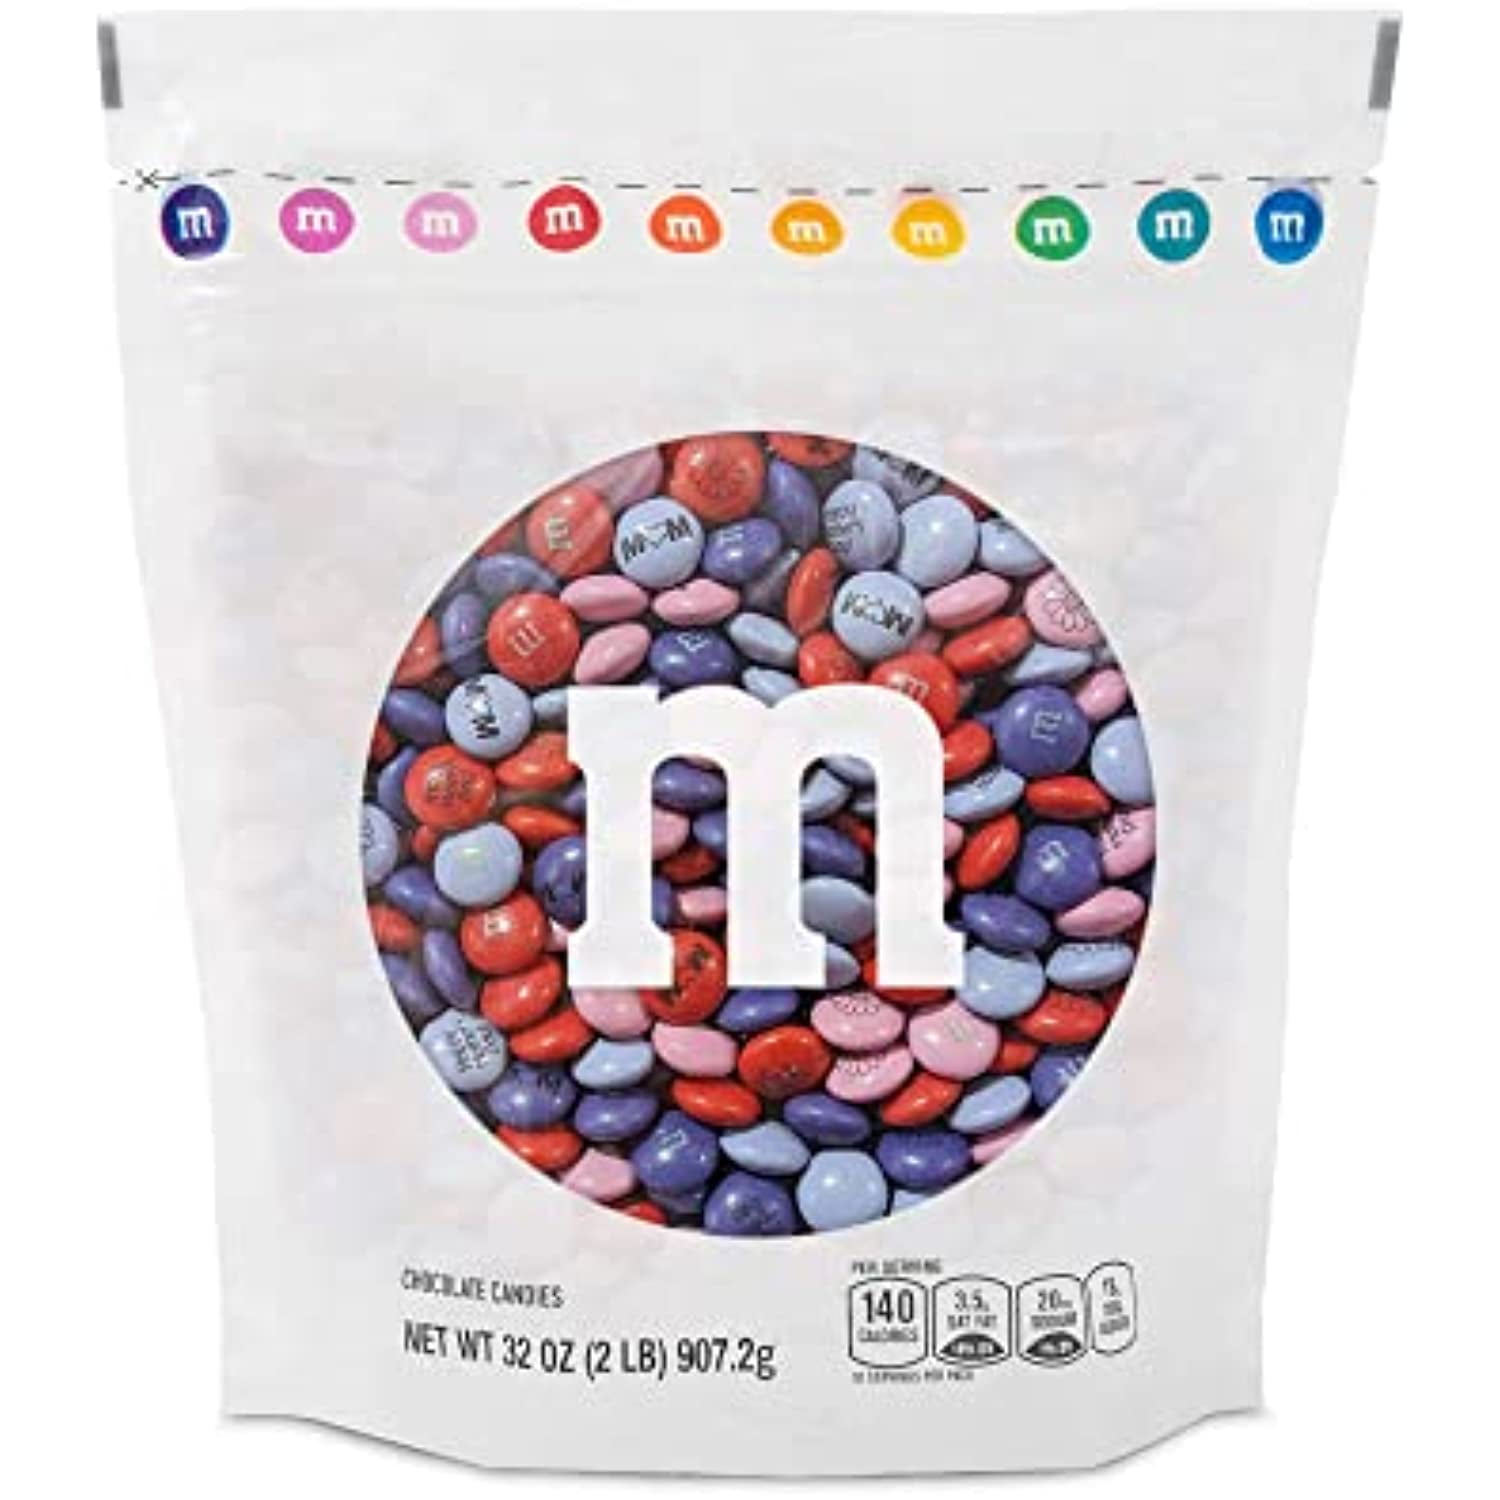 M&M'S Pre-Printed Patriotic Milk Chocolate Candy - 2lbs of bulk candy in  resealable bag perfect for 4th of July Parties, Patriotic Celebrations